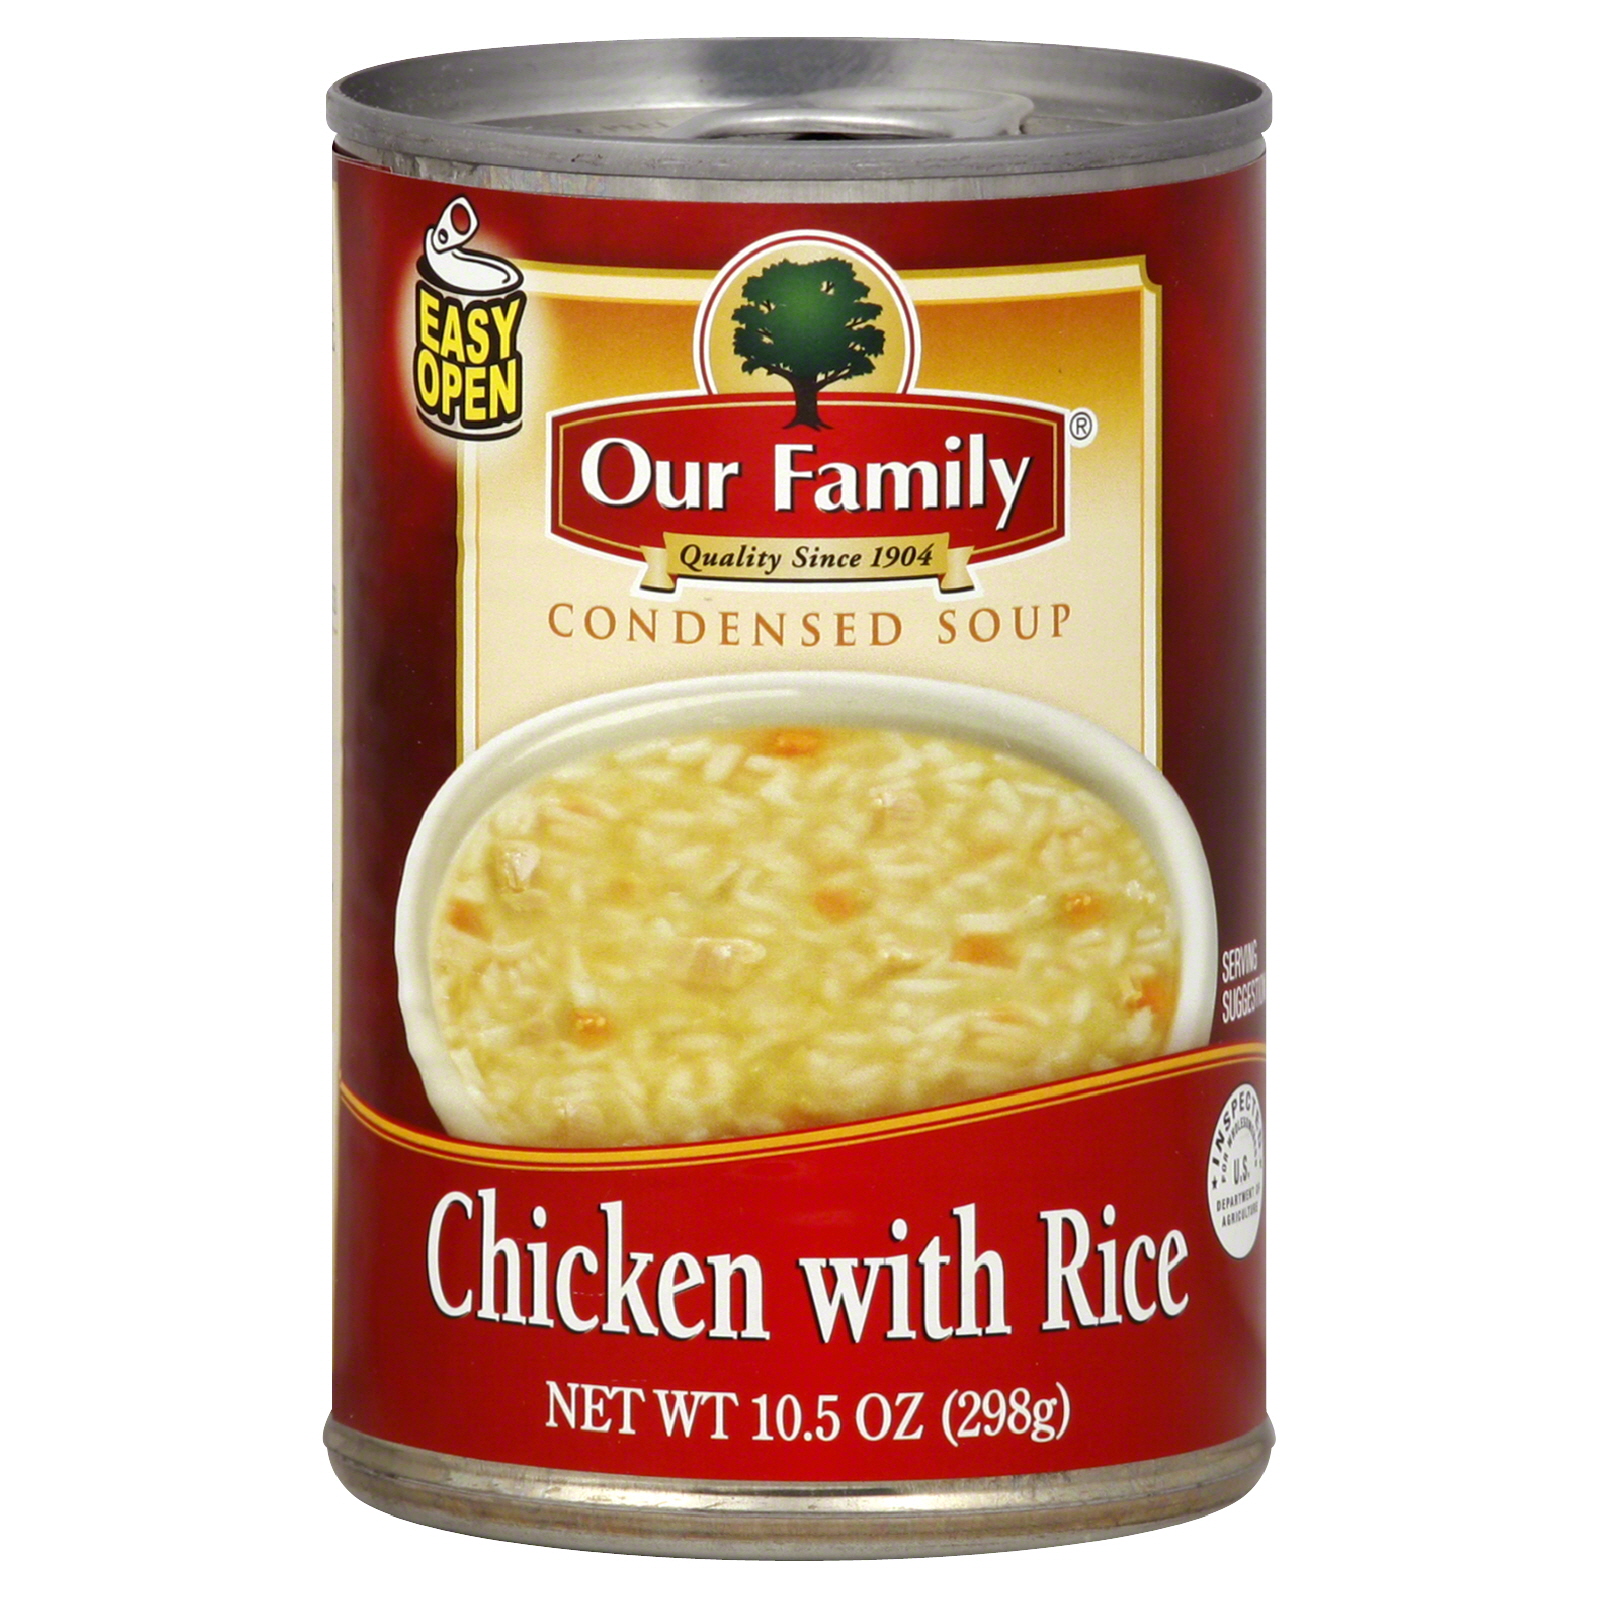 Our Family Soup, Condensed, Chicken with Rice, 10.5 oz (297 g)